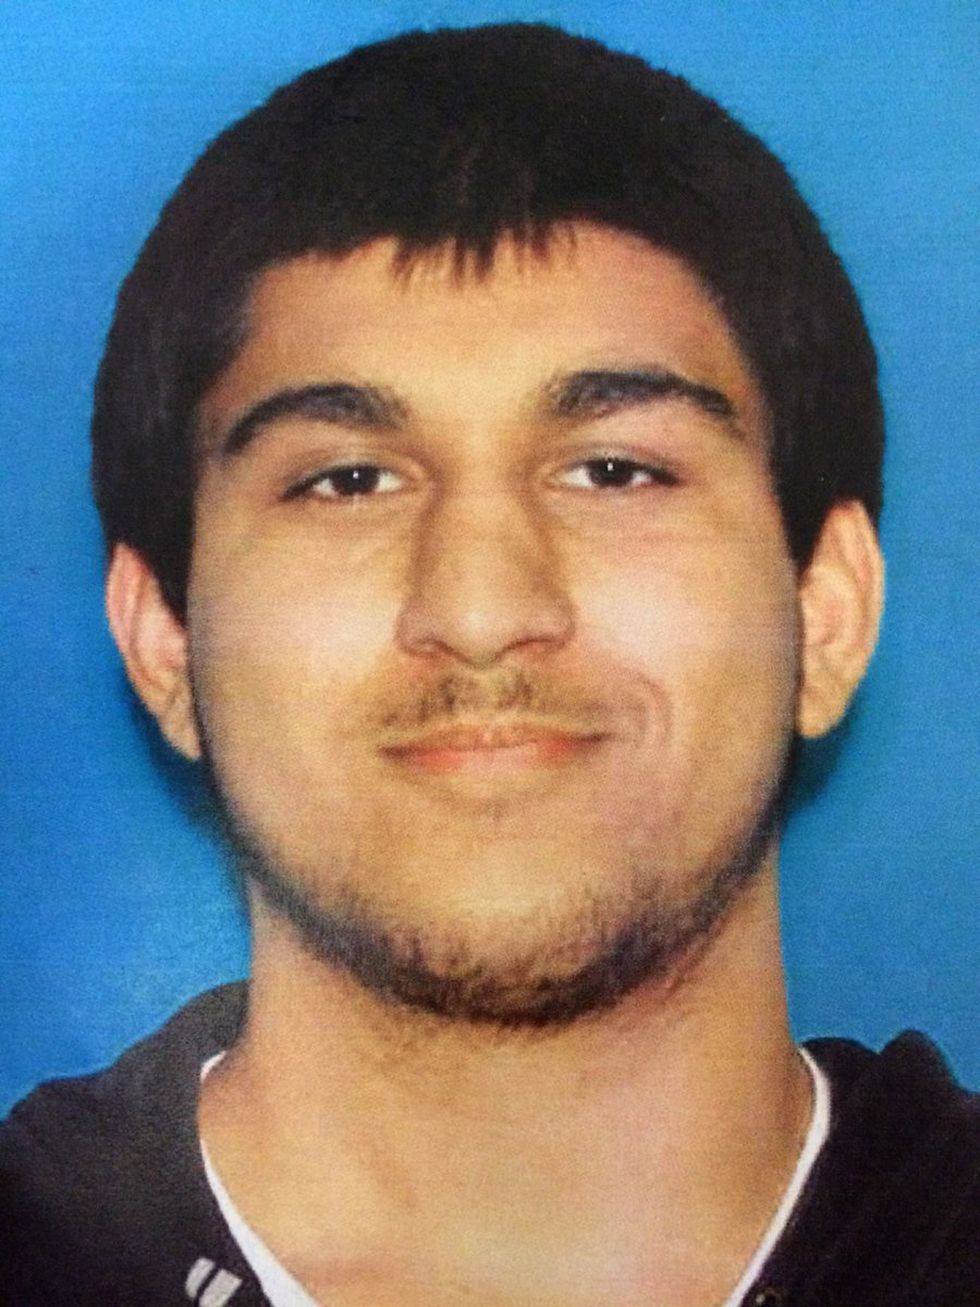 Washington police: 20-year-old mall shooting suspect 'zombie-like' at arrest